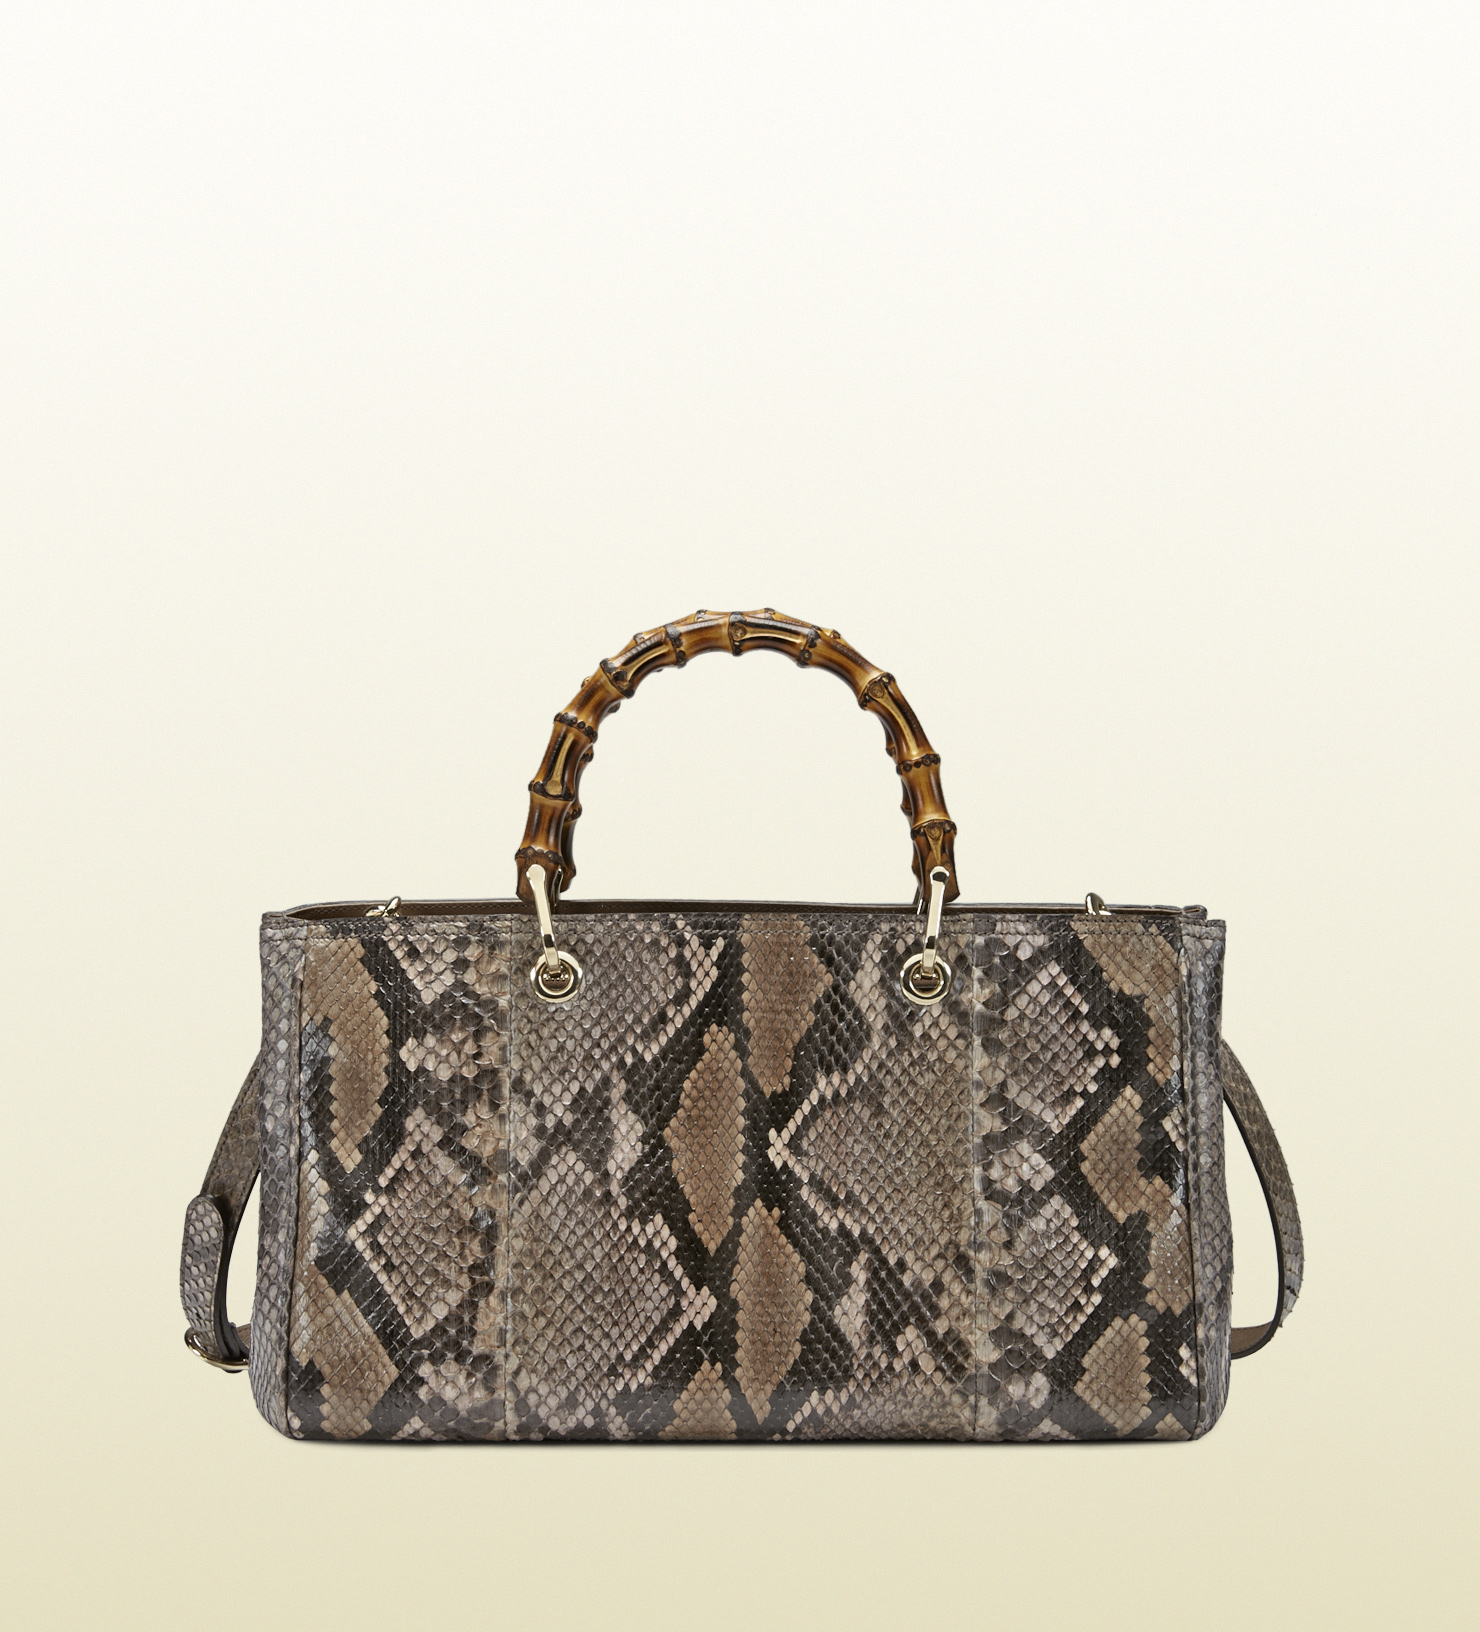 Gucci Bamboo Shopper Python Tote in Brown